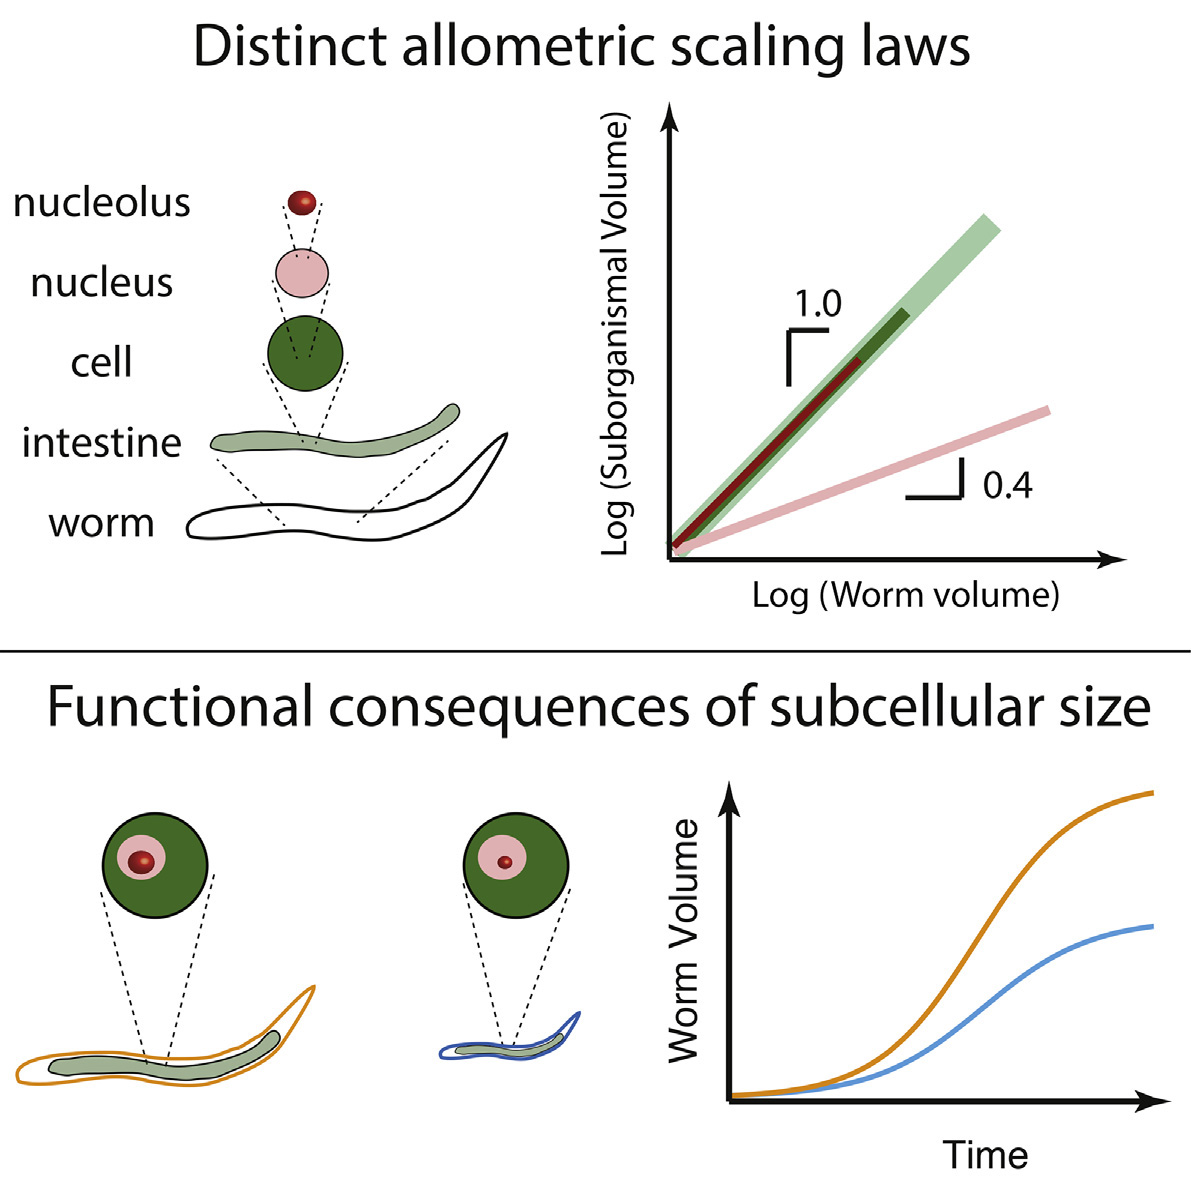 Illustration of functional consequences of subcellular size, and distinct allometric scaling laws